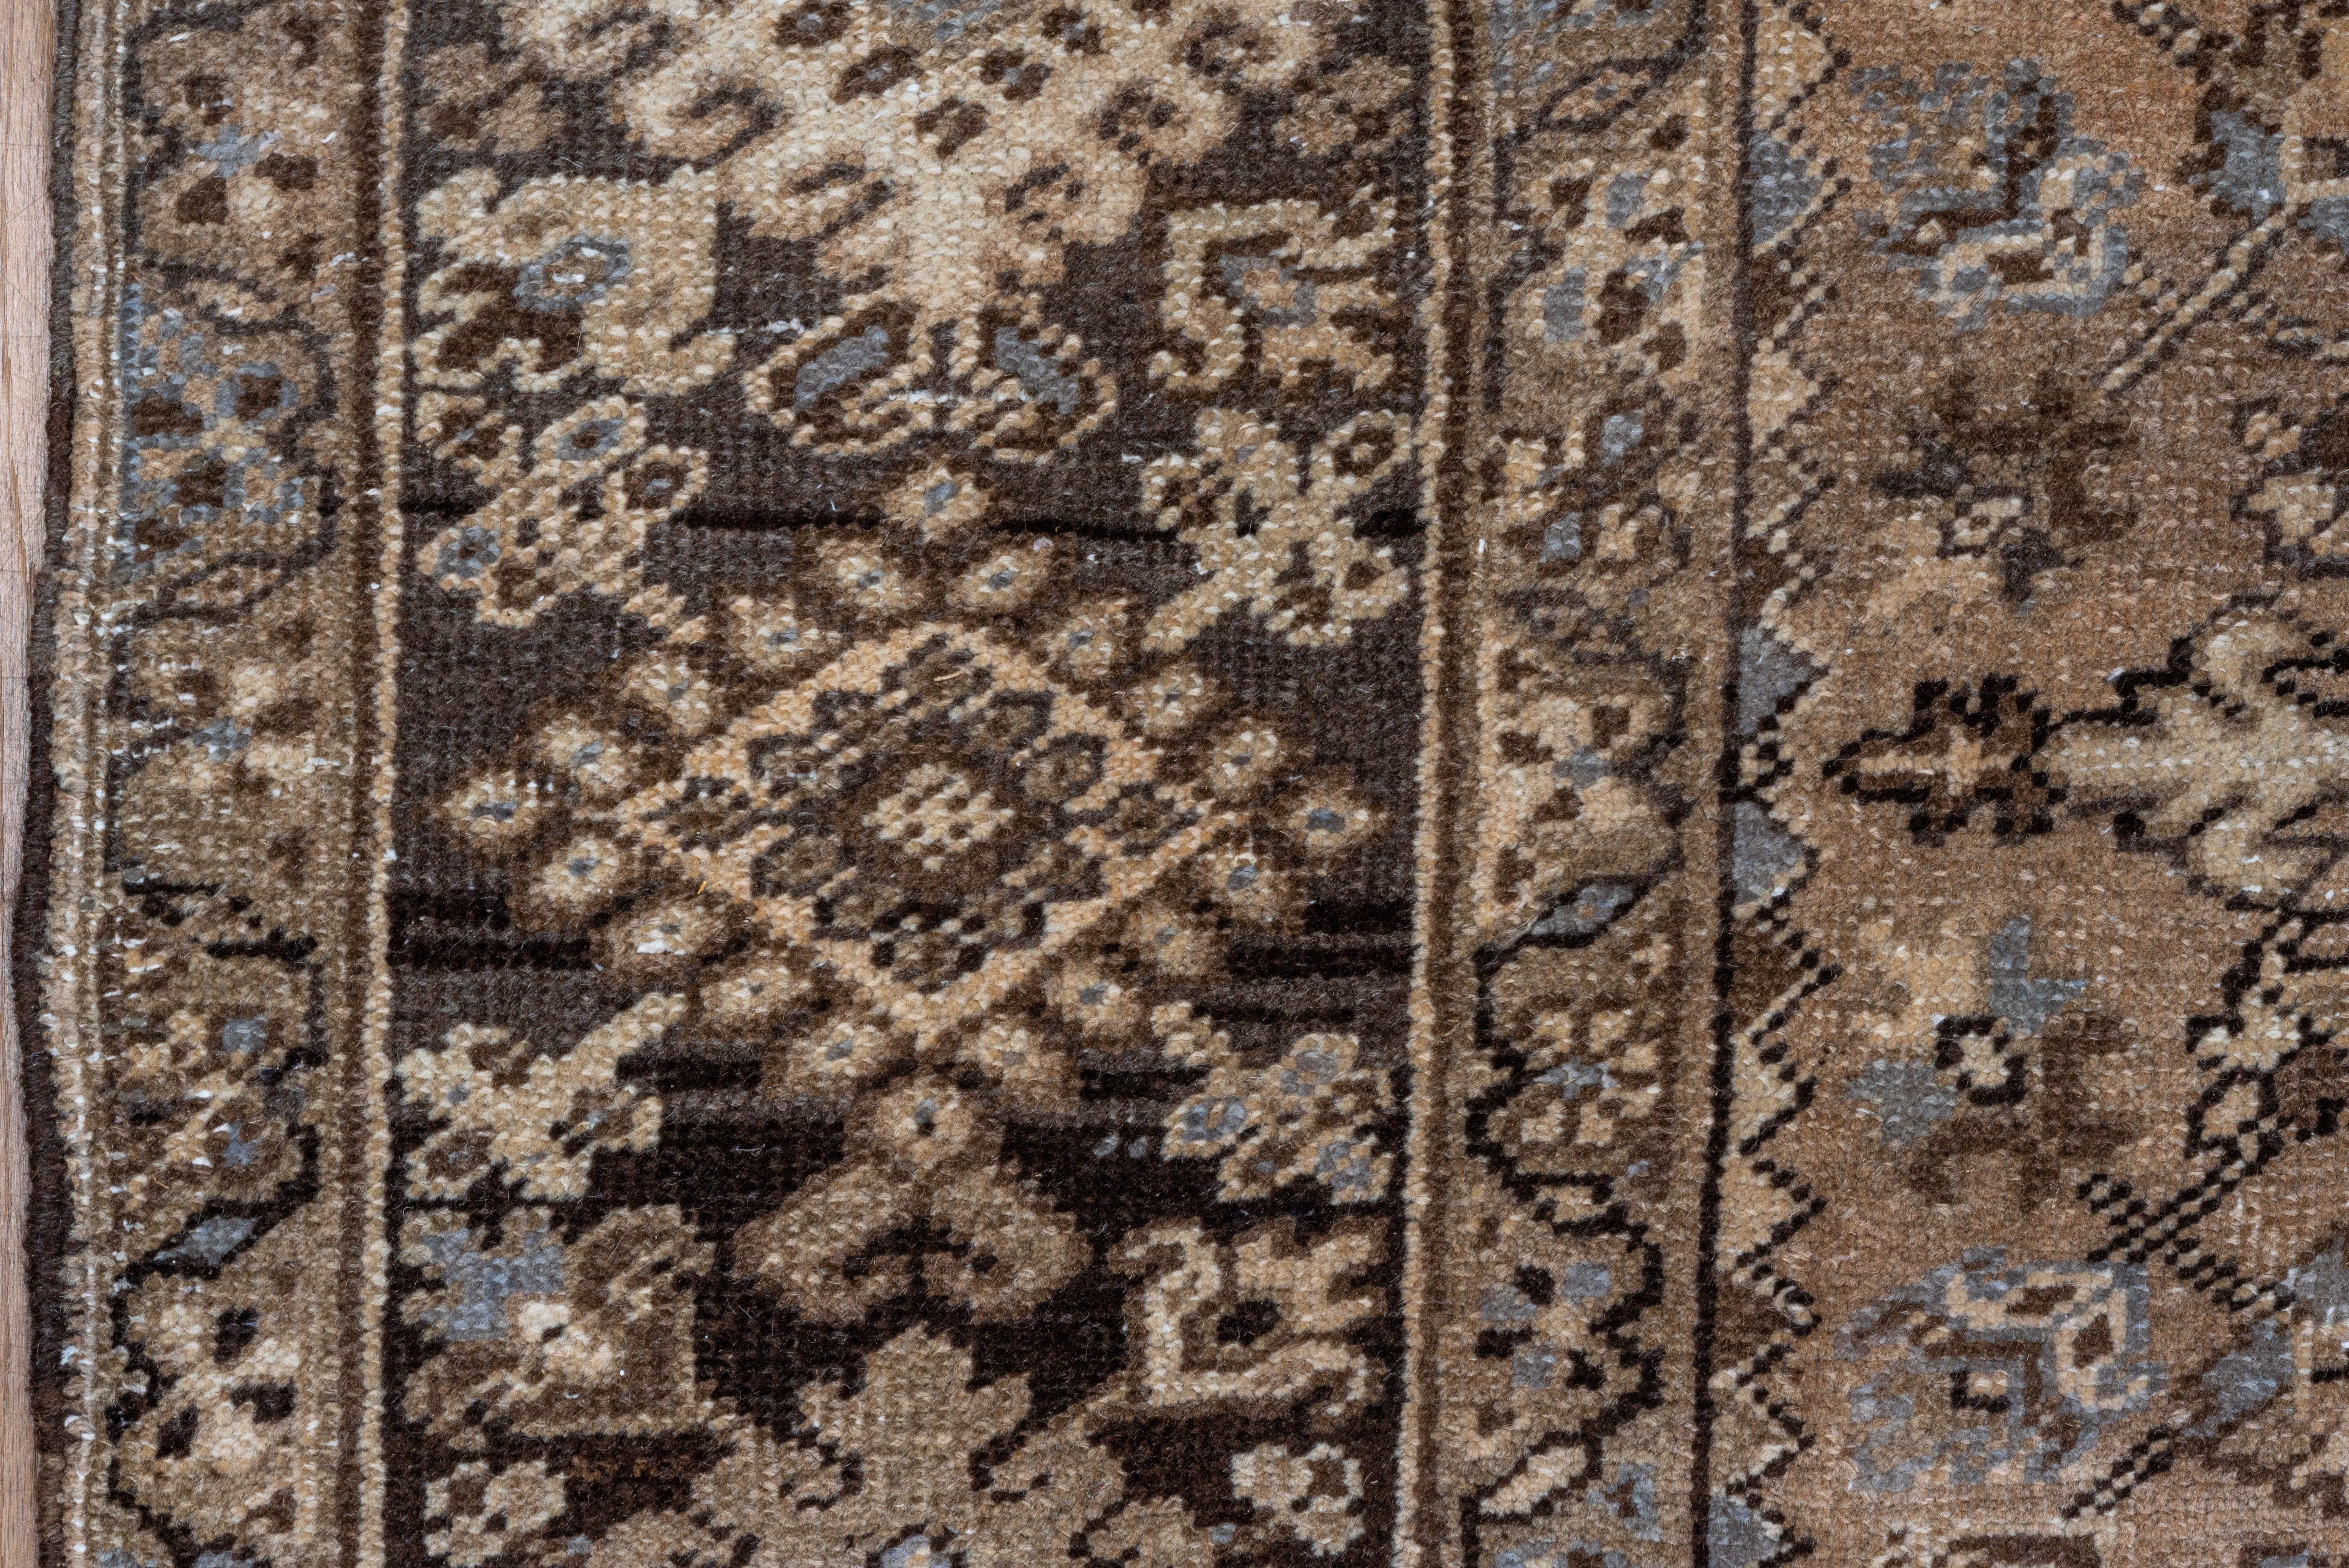 This well-decorated NW Persian village carpet shows a reciprocally fringed field with a layered, en suite dark brown and ecru diamond medallion. Wide ecru conjoint corners with small floating flower décor. Dark border with chains of fringed